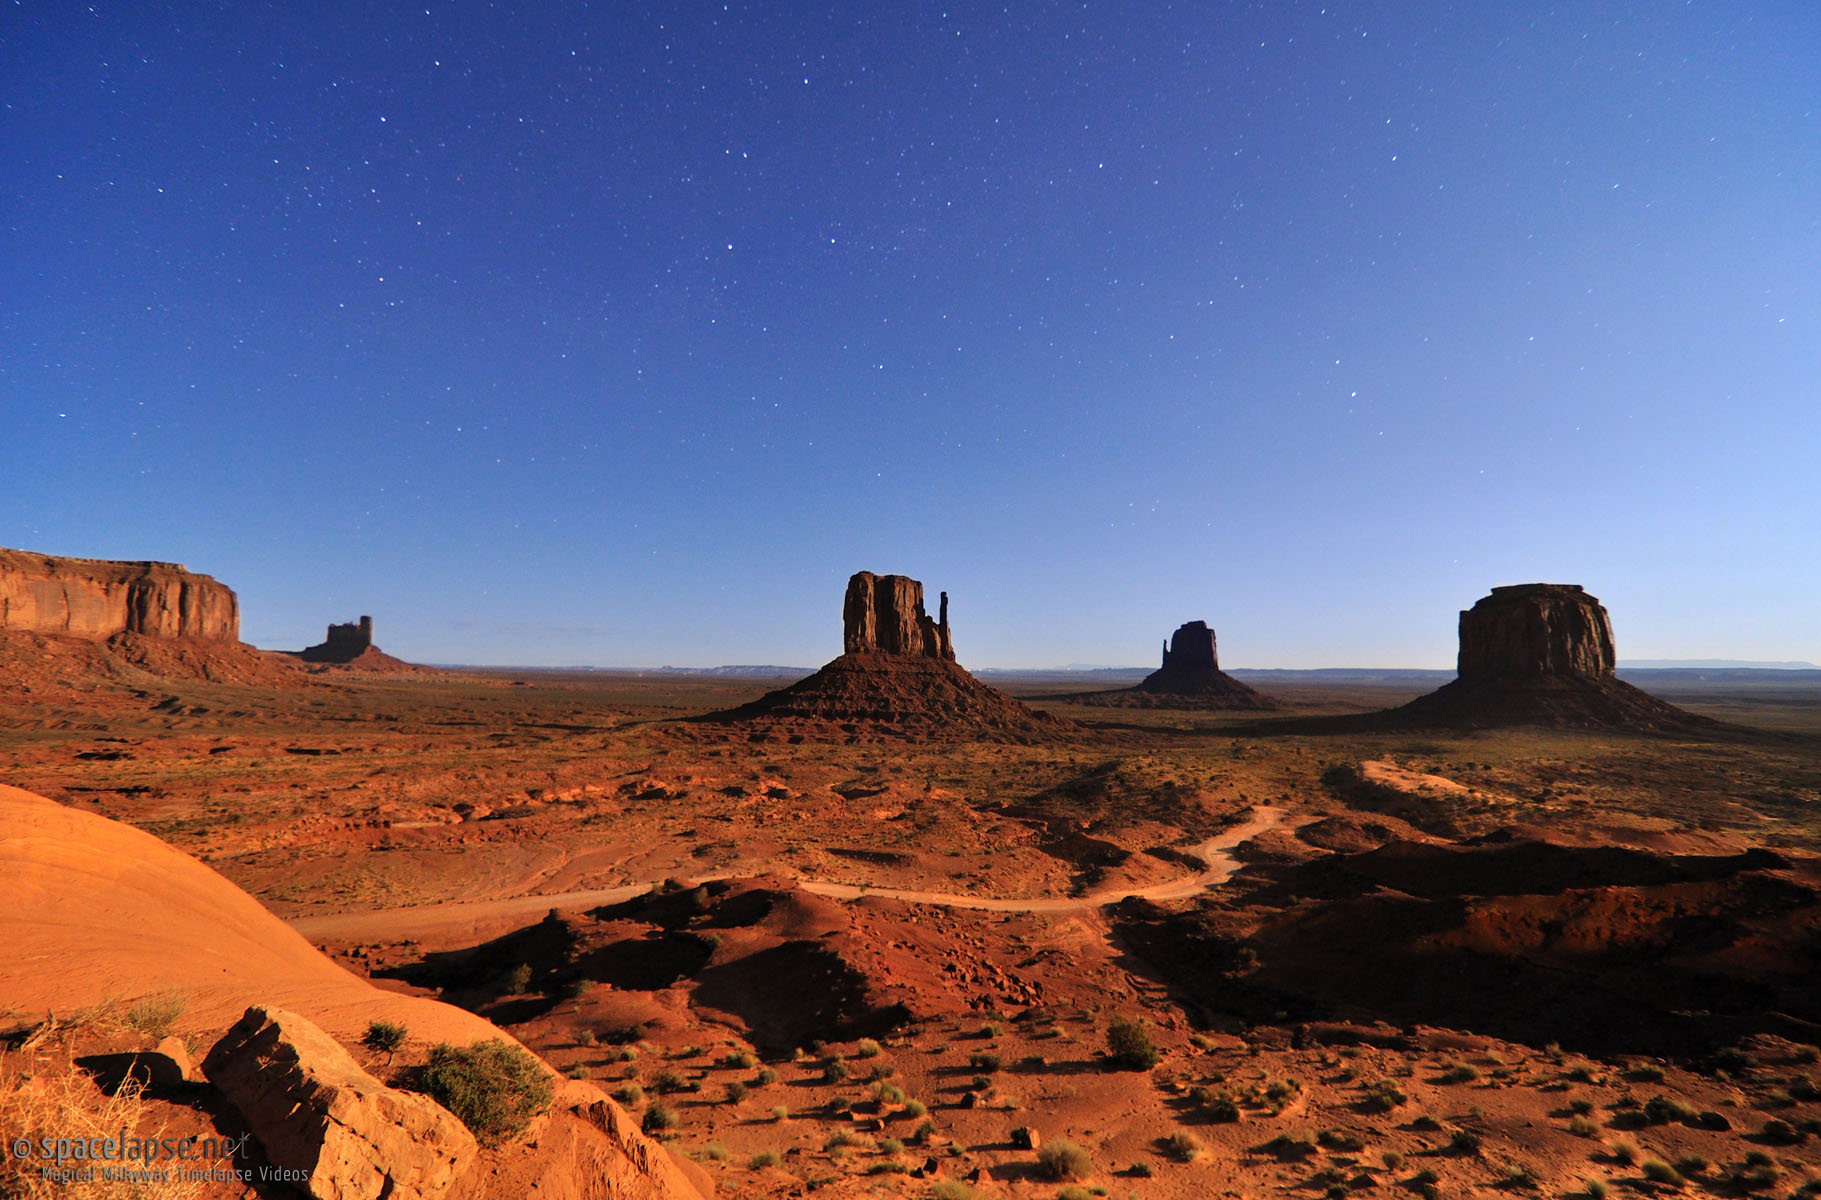 Moonshine Valley - Monument Valley at moonshine